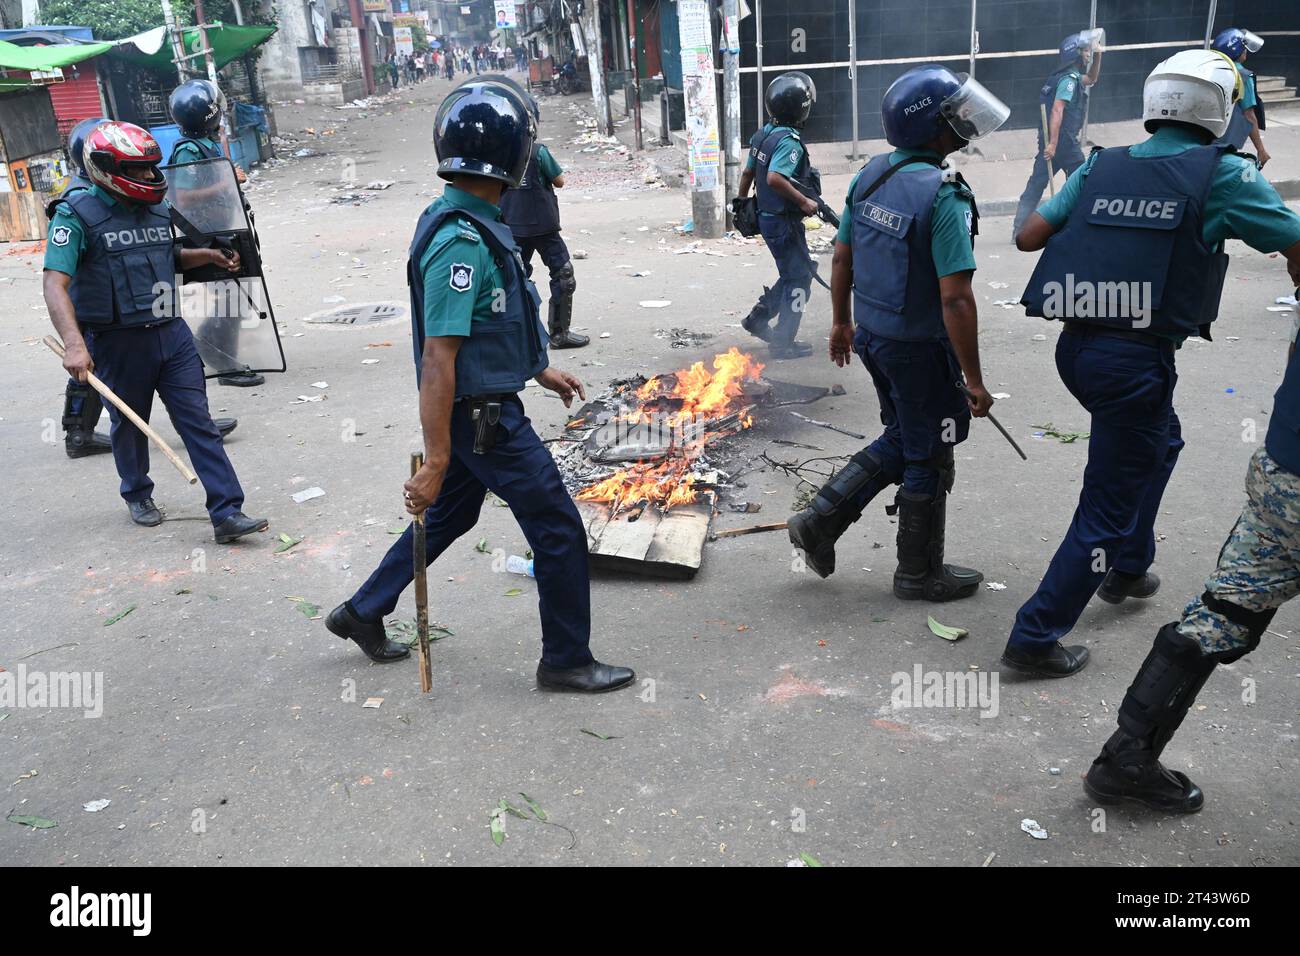 Dhaka, Bangladesh. 28th Oct 2023. Police clash with Supporters of Bangladesh Nationalist Party (BNP) during protest rally demanding the resignation of Prime Minister Sheikh Hasina and holding the next general election under a non-party caretaker government, in front of their head office in Dhaka, Bangladesh, on October 28, 2023 Credit: Mamunur Rashid/Alamy Live News Stock Photo